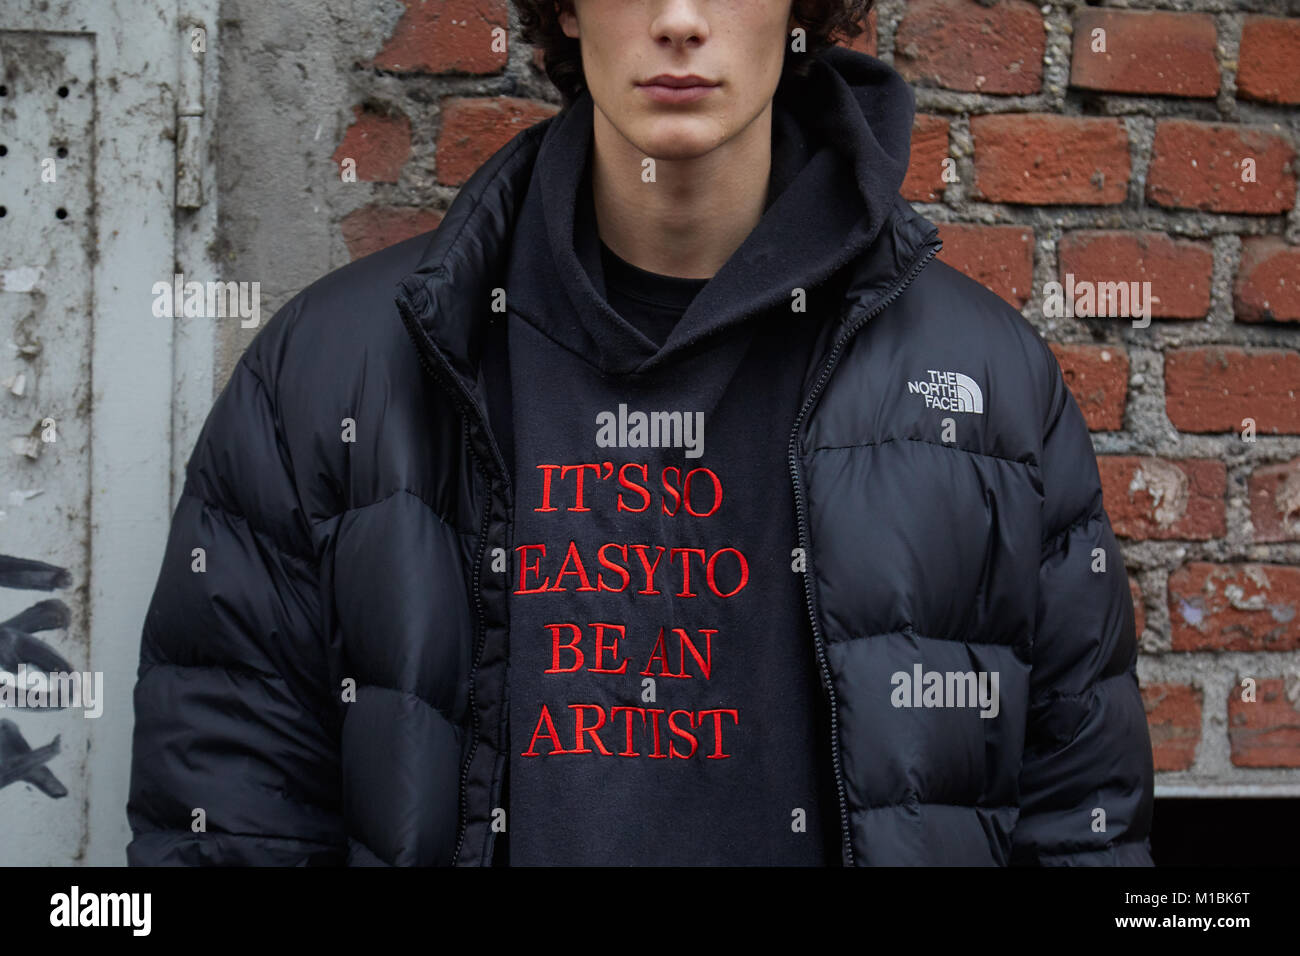 MILAN - JANUARY 15: Man with black The North Face padded jacket and hoodie  with 'It's so easy to be an artist' motto before Fendi fashion show, Milan  Stock Photo - Alamy